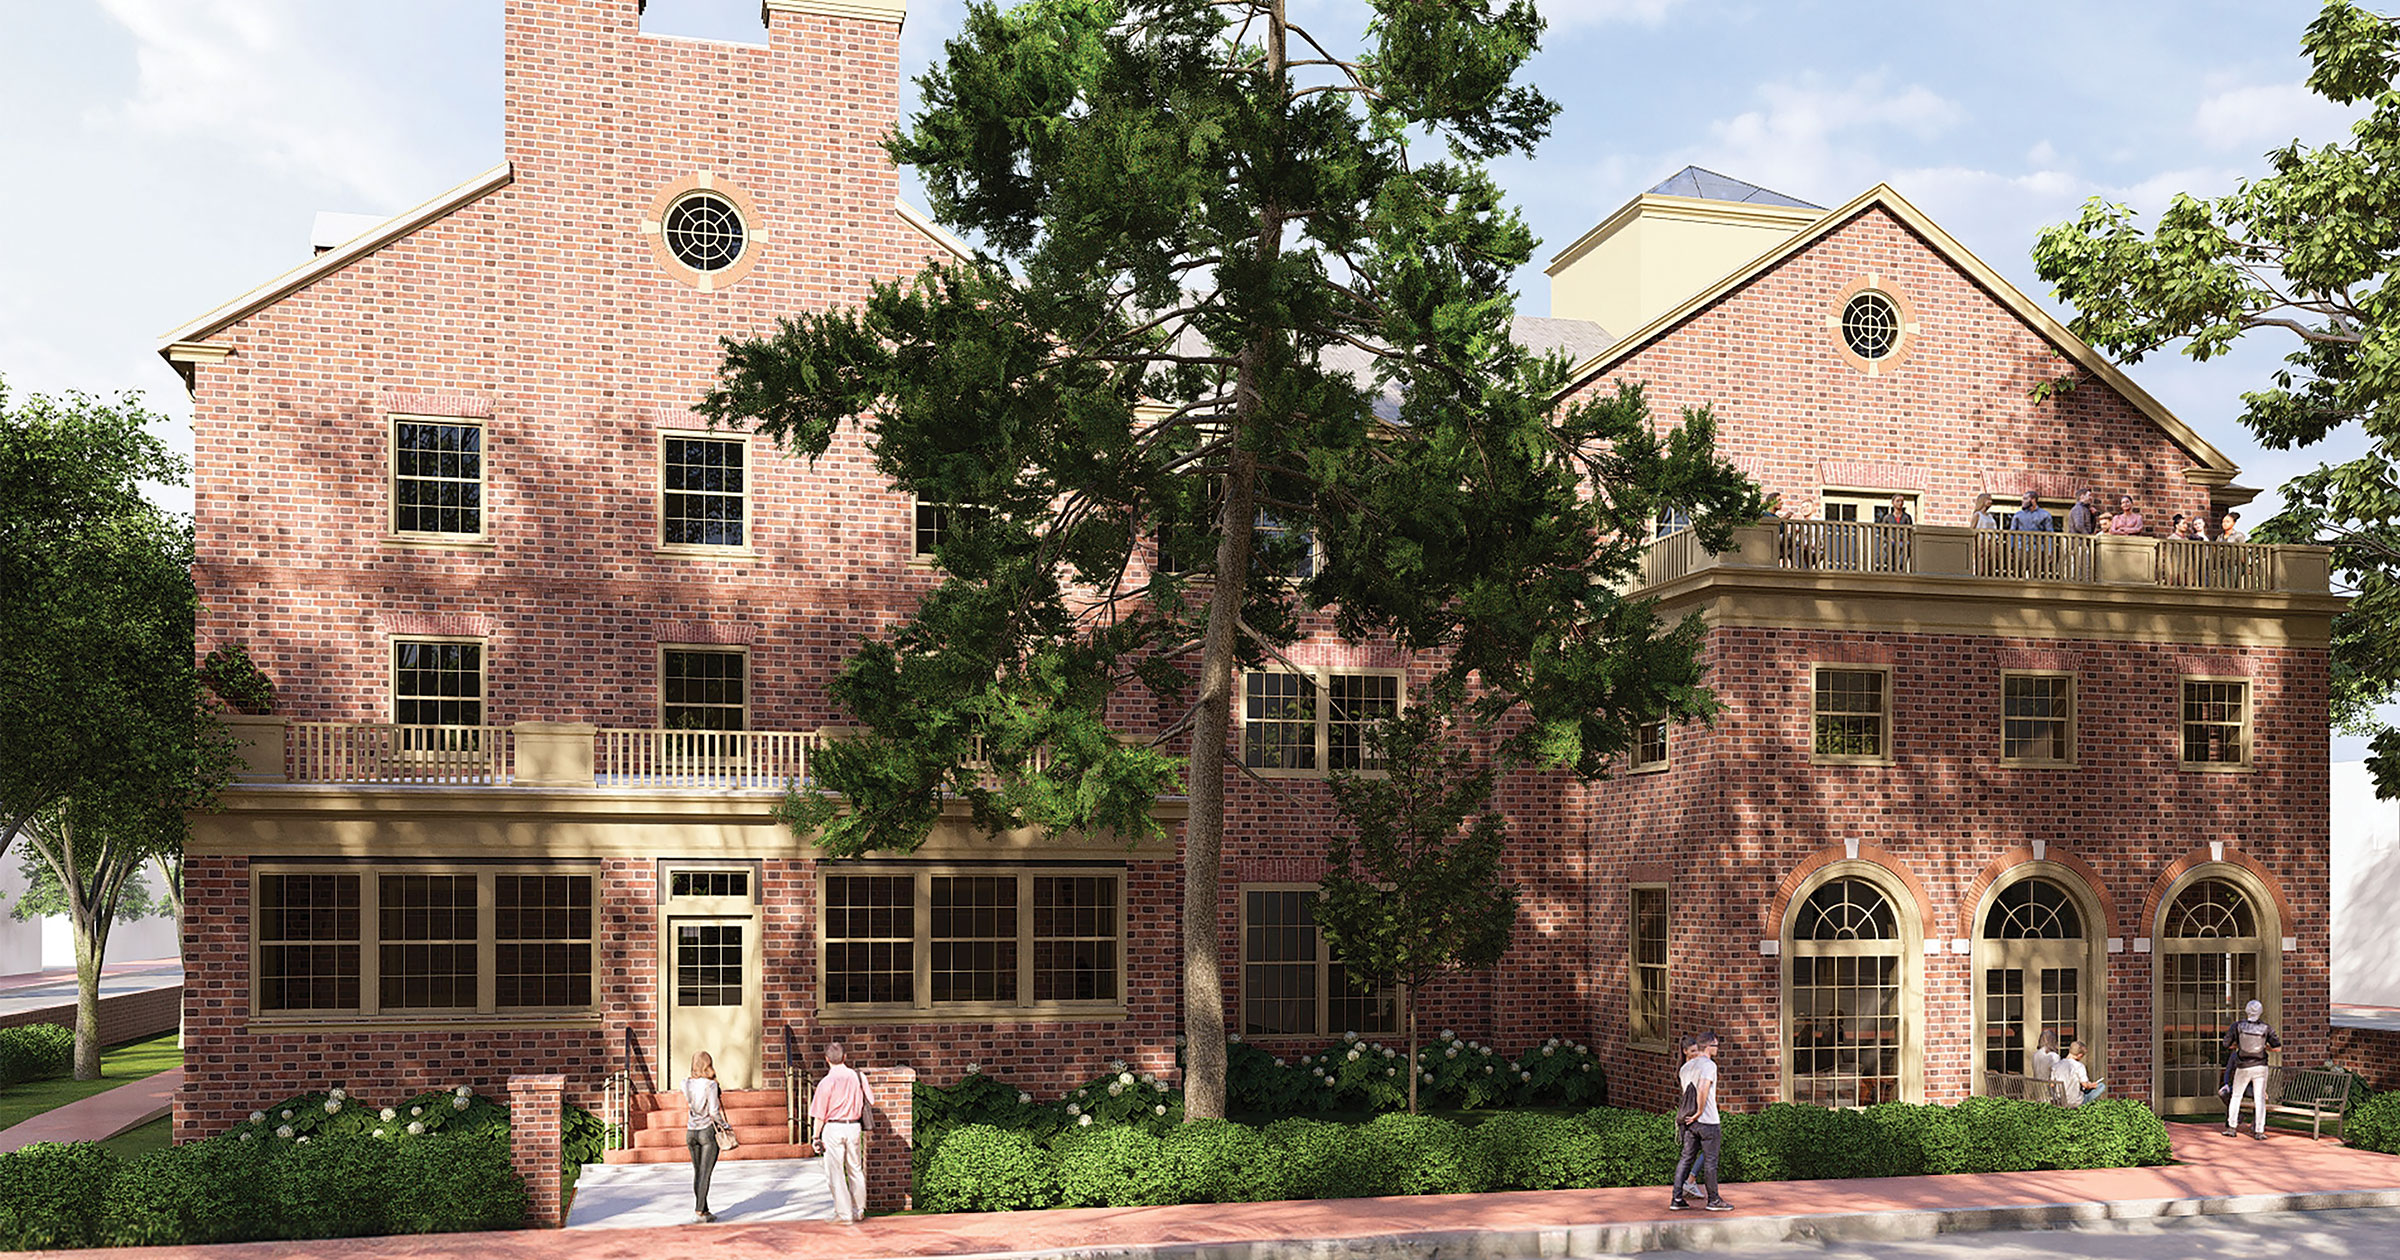 $30M Gift to Honor W&M Chancellor